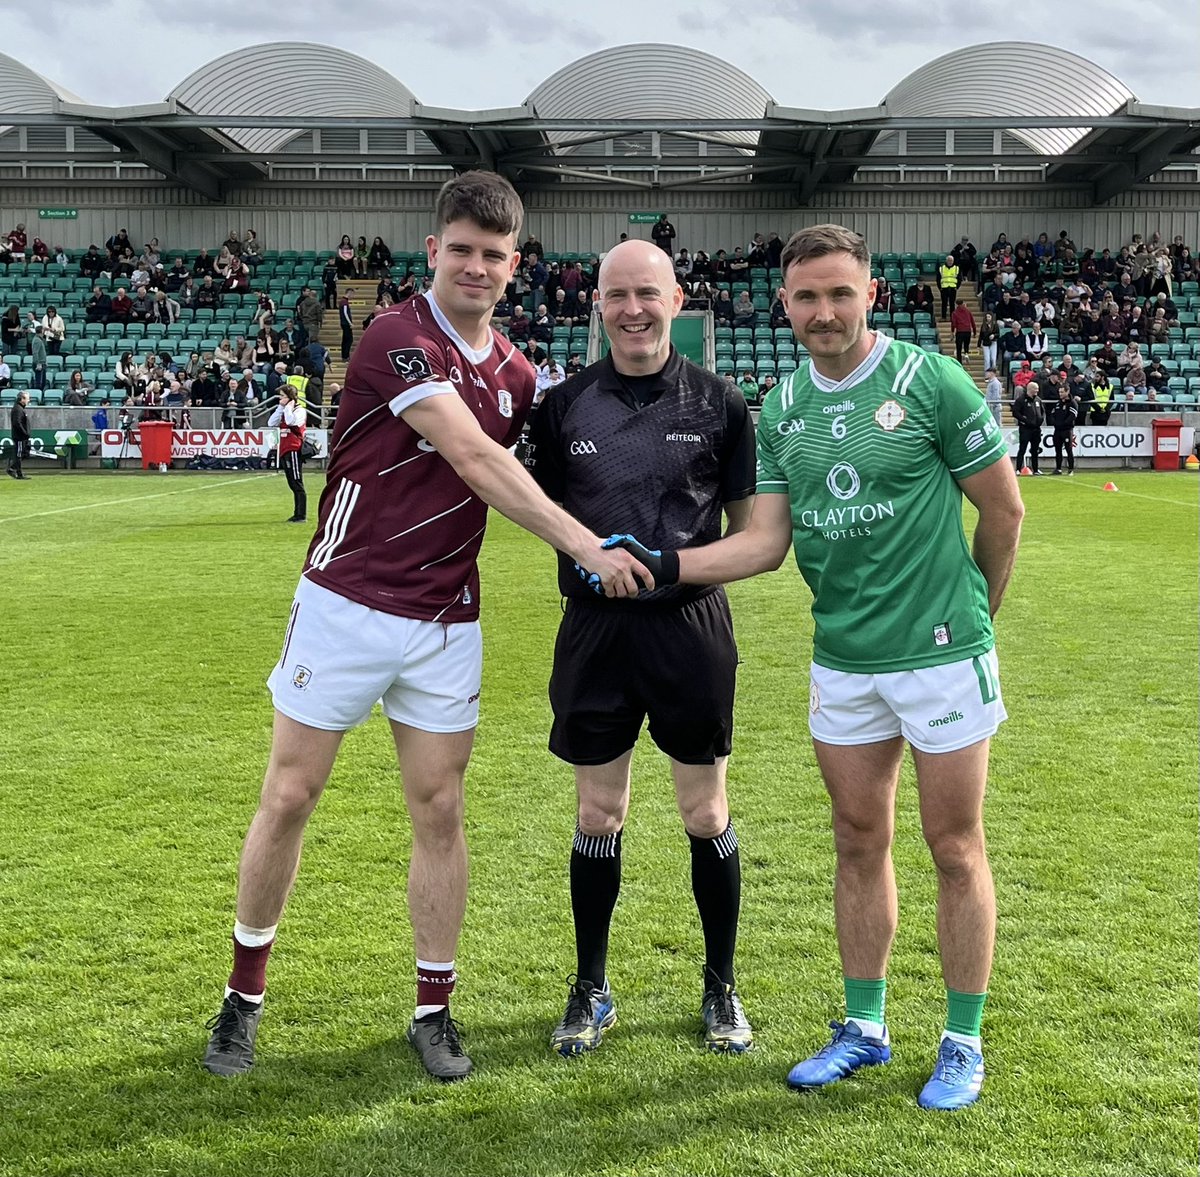 Galway cruise to victory vs London in the Connacht Senior Football Championship, 5-21 to 9pts 🙌🏐 Iconic moment where Sean Kelly & Eoin Walsh, both from the same club Moycullen, are captain for both counties 👏👏👆👌💪 #GalwayGaa #Connachtgaa #Gaa #Gaelicfootball #Londongaa